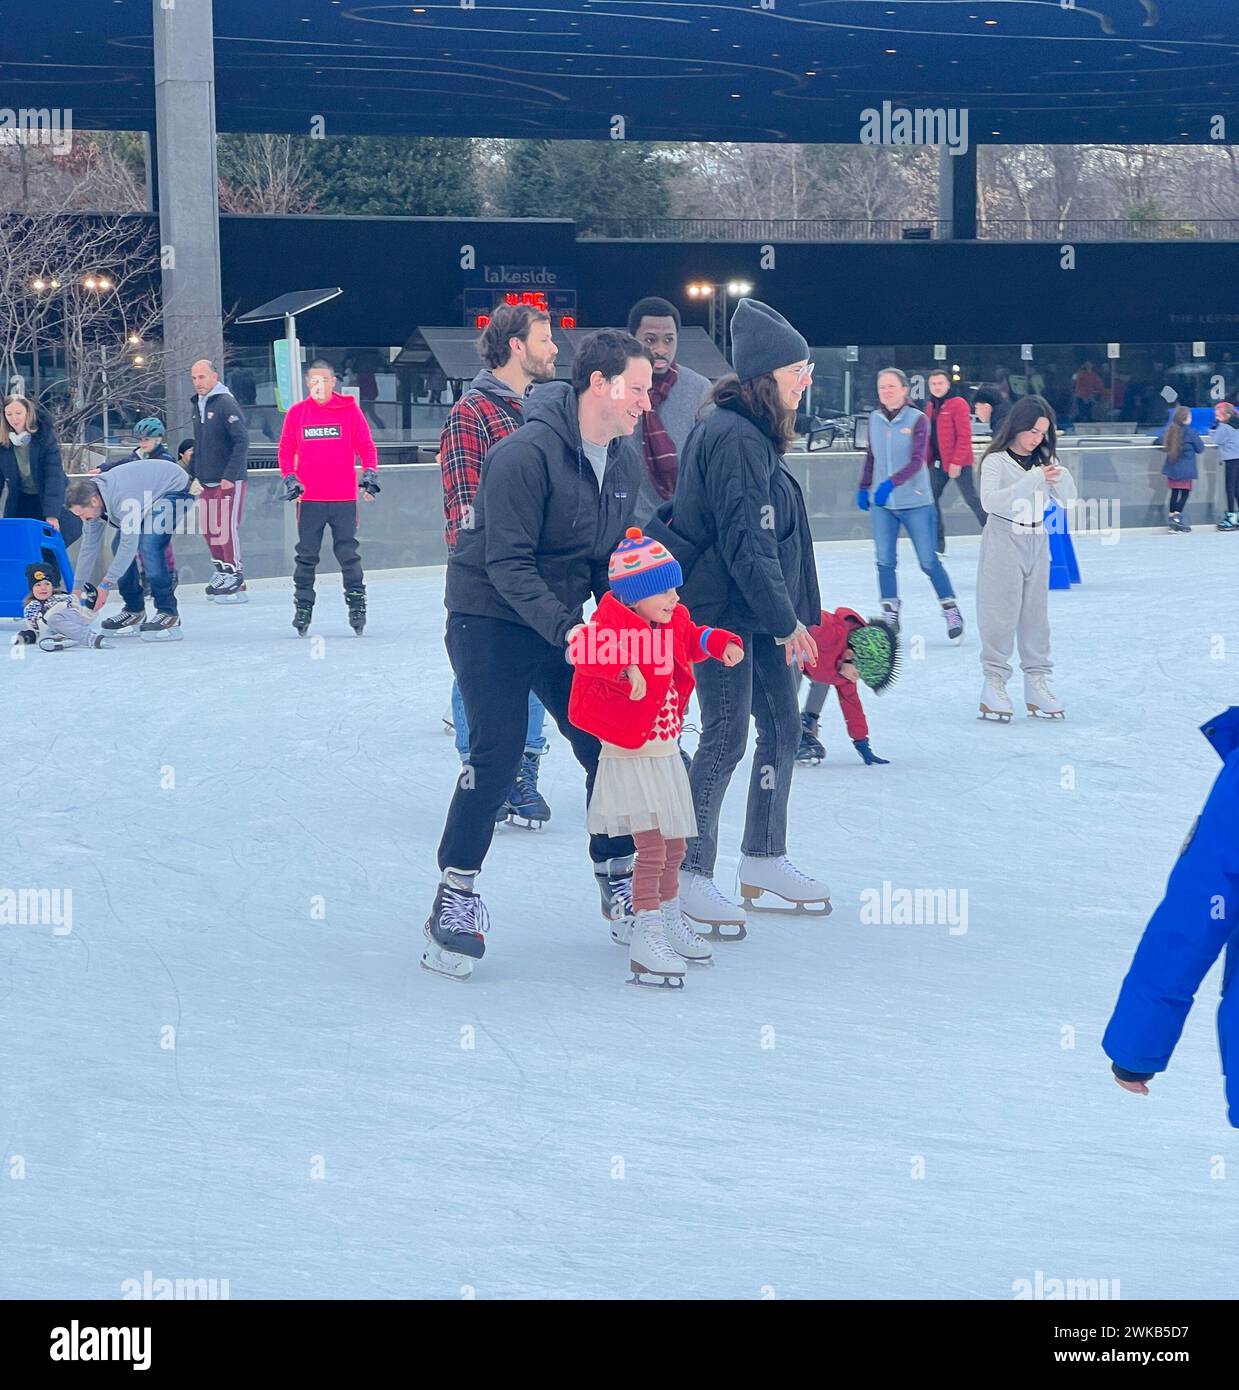 People enjoy ice skating on a February day in Prospect Park, Brooklyn, New York. Stock Photo